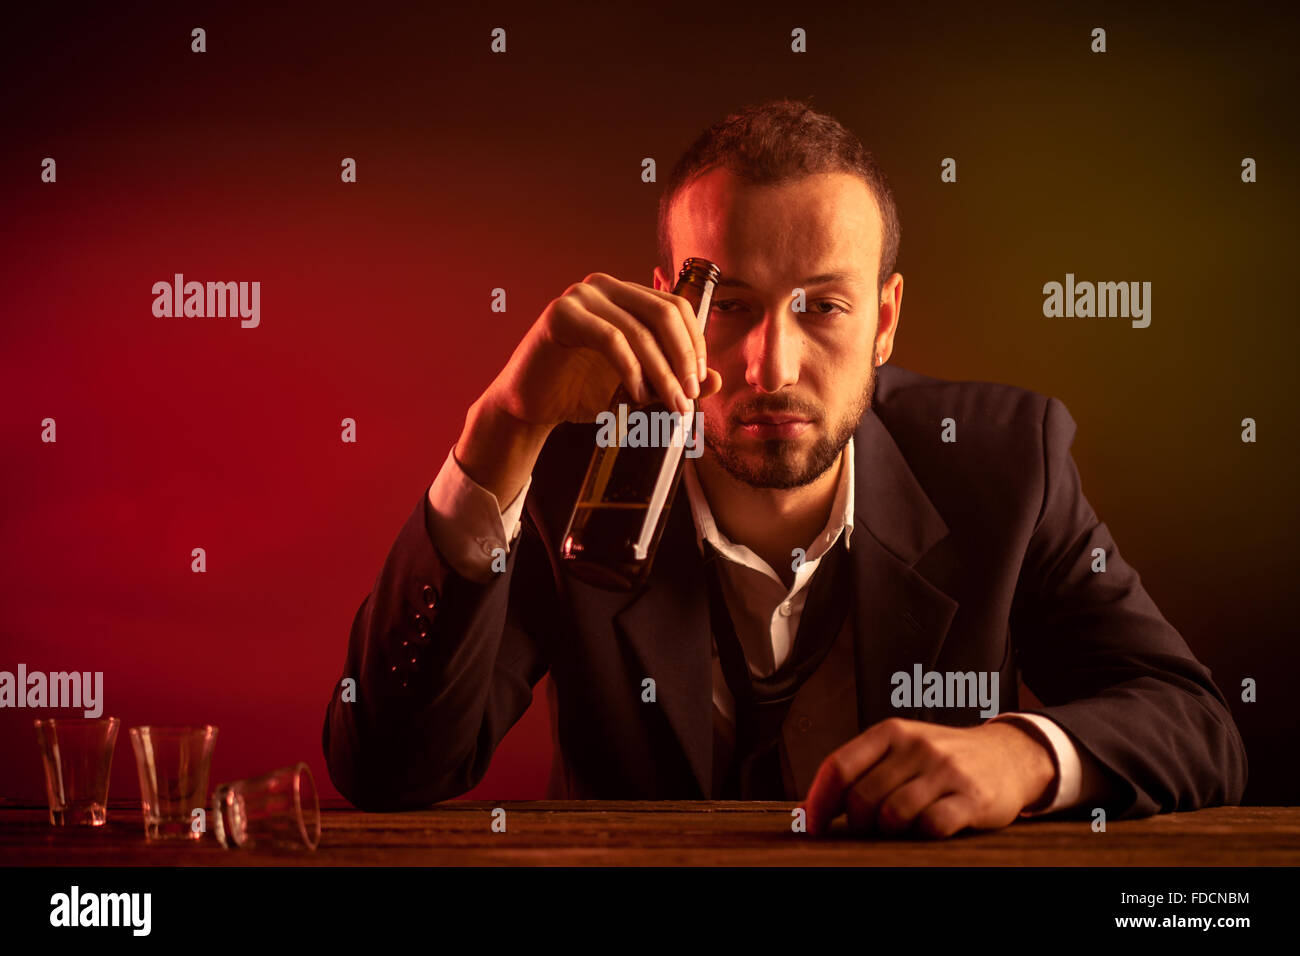 Drunk Businessman Drinking a Beer in a Pub Stock Photo